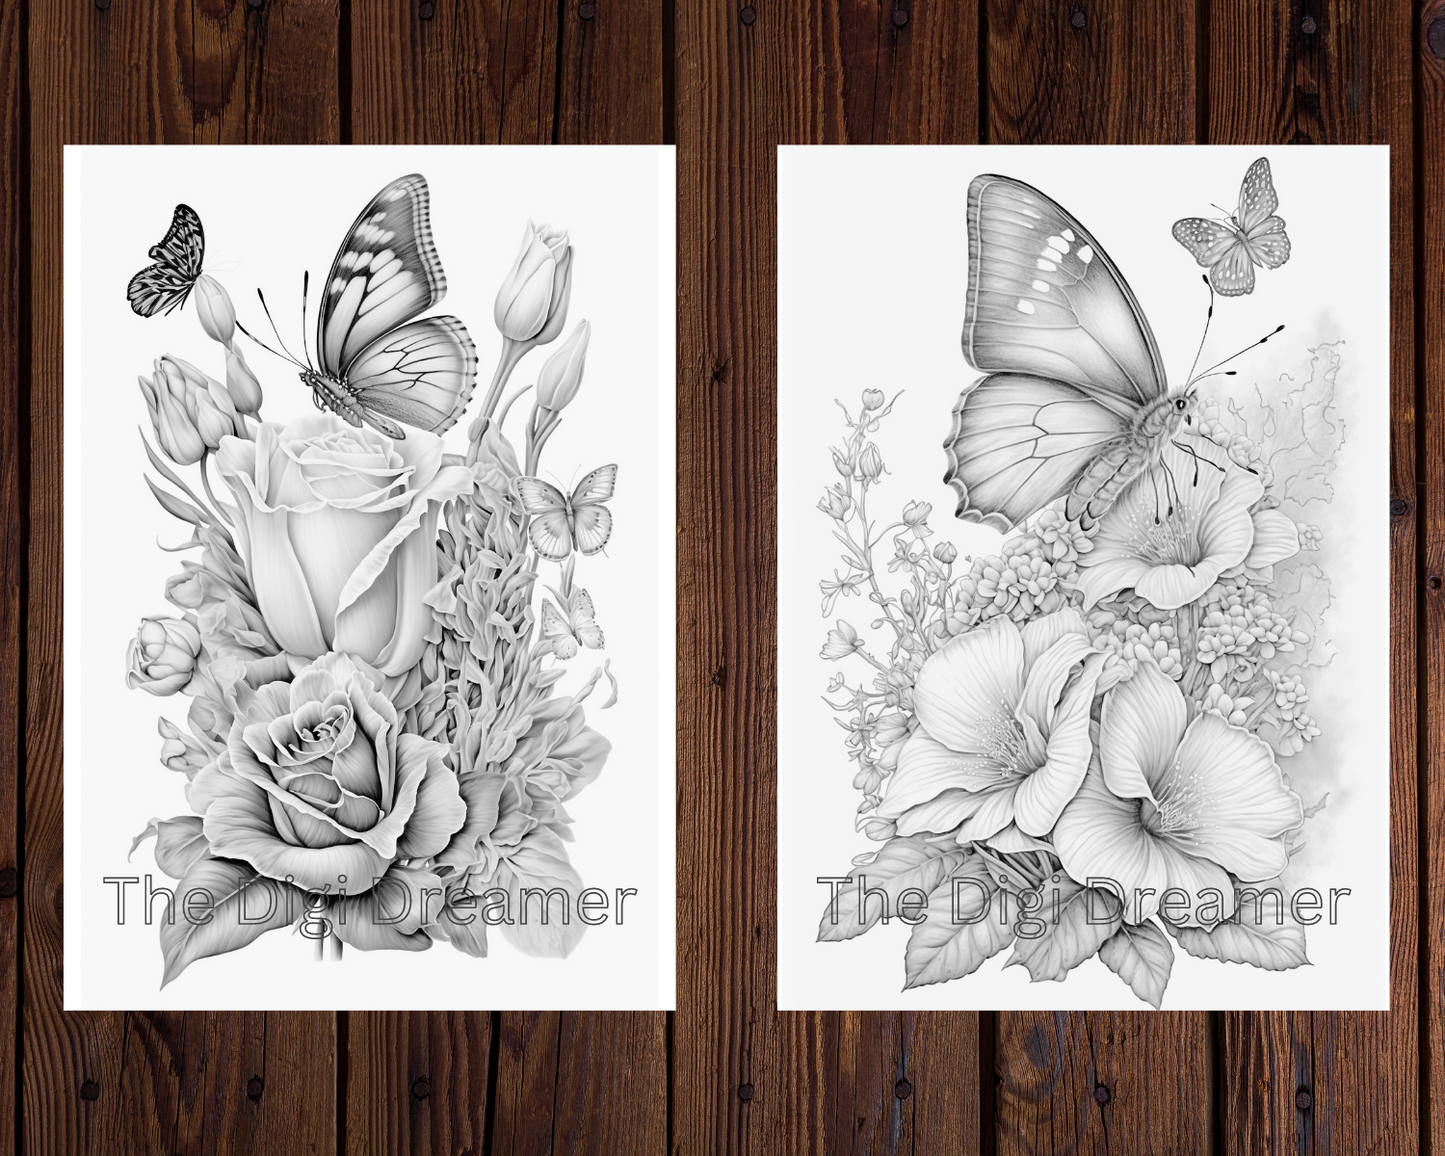 Flowers and Butterflies - Grayscale Printable Coloring Pages For Adults & Kids